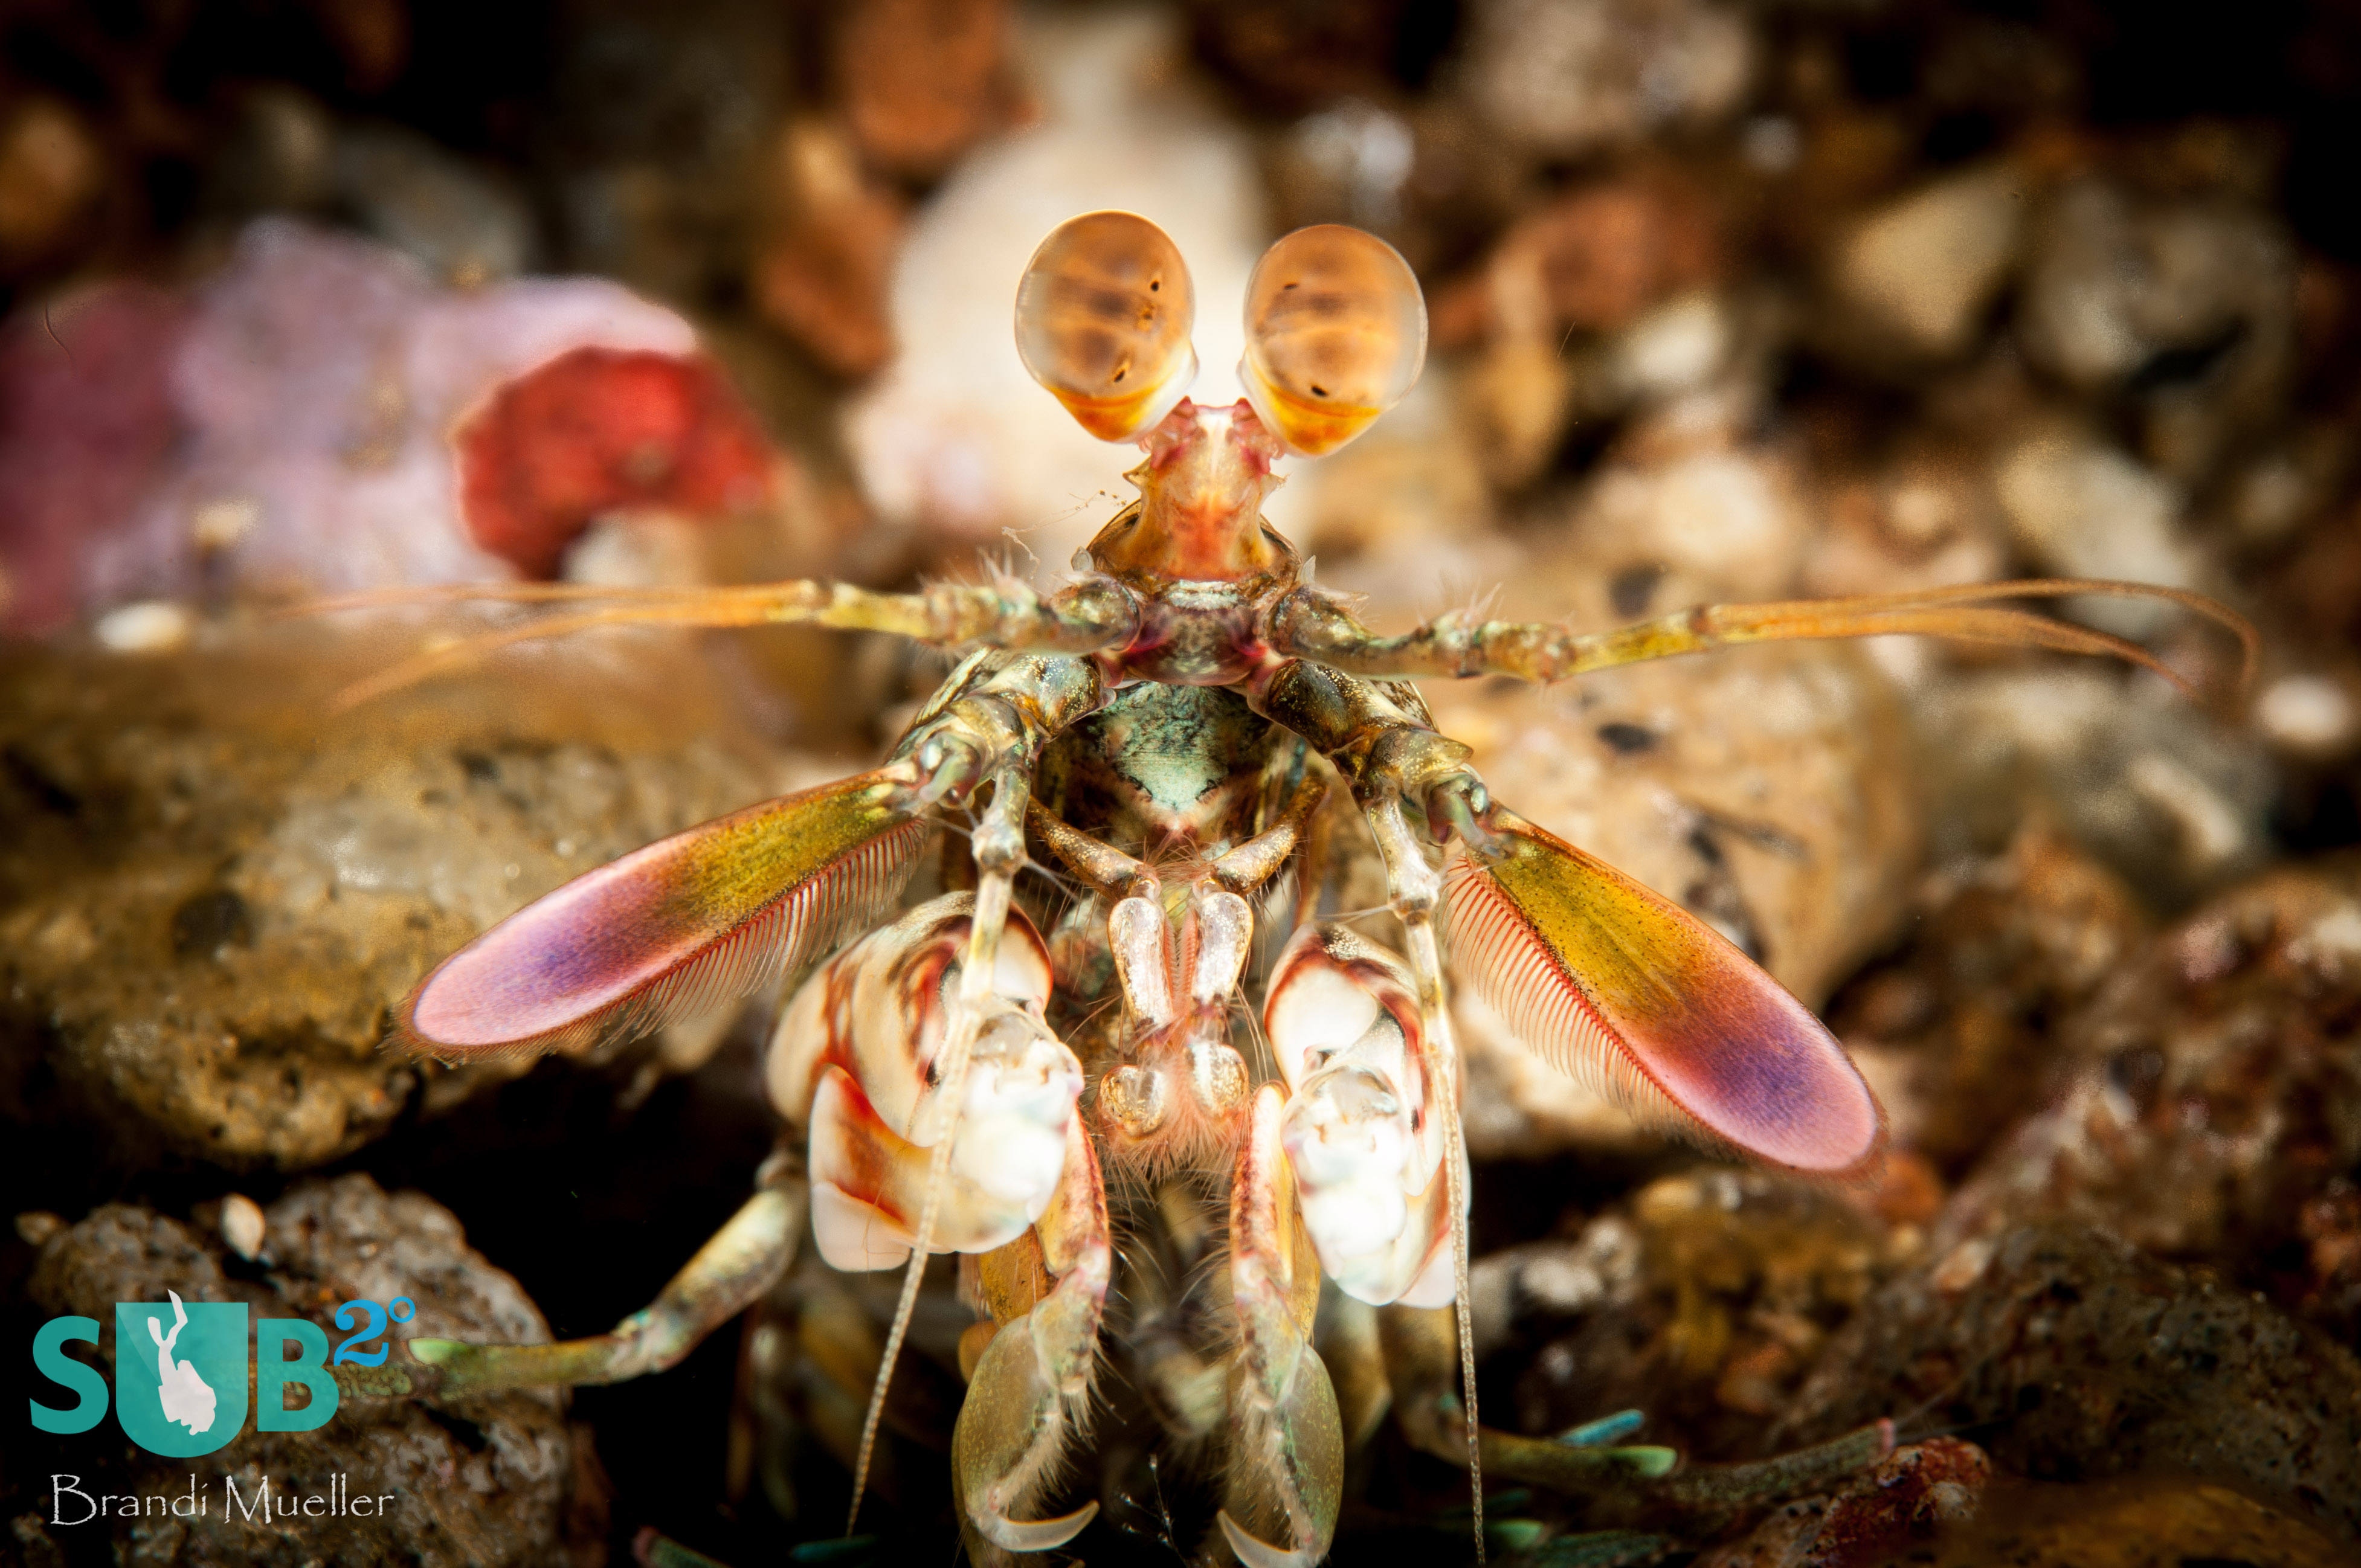 A peacock mantis shrimp peers out of its home in the sand.